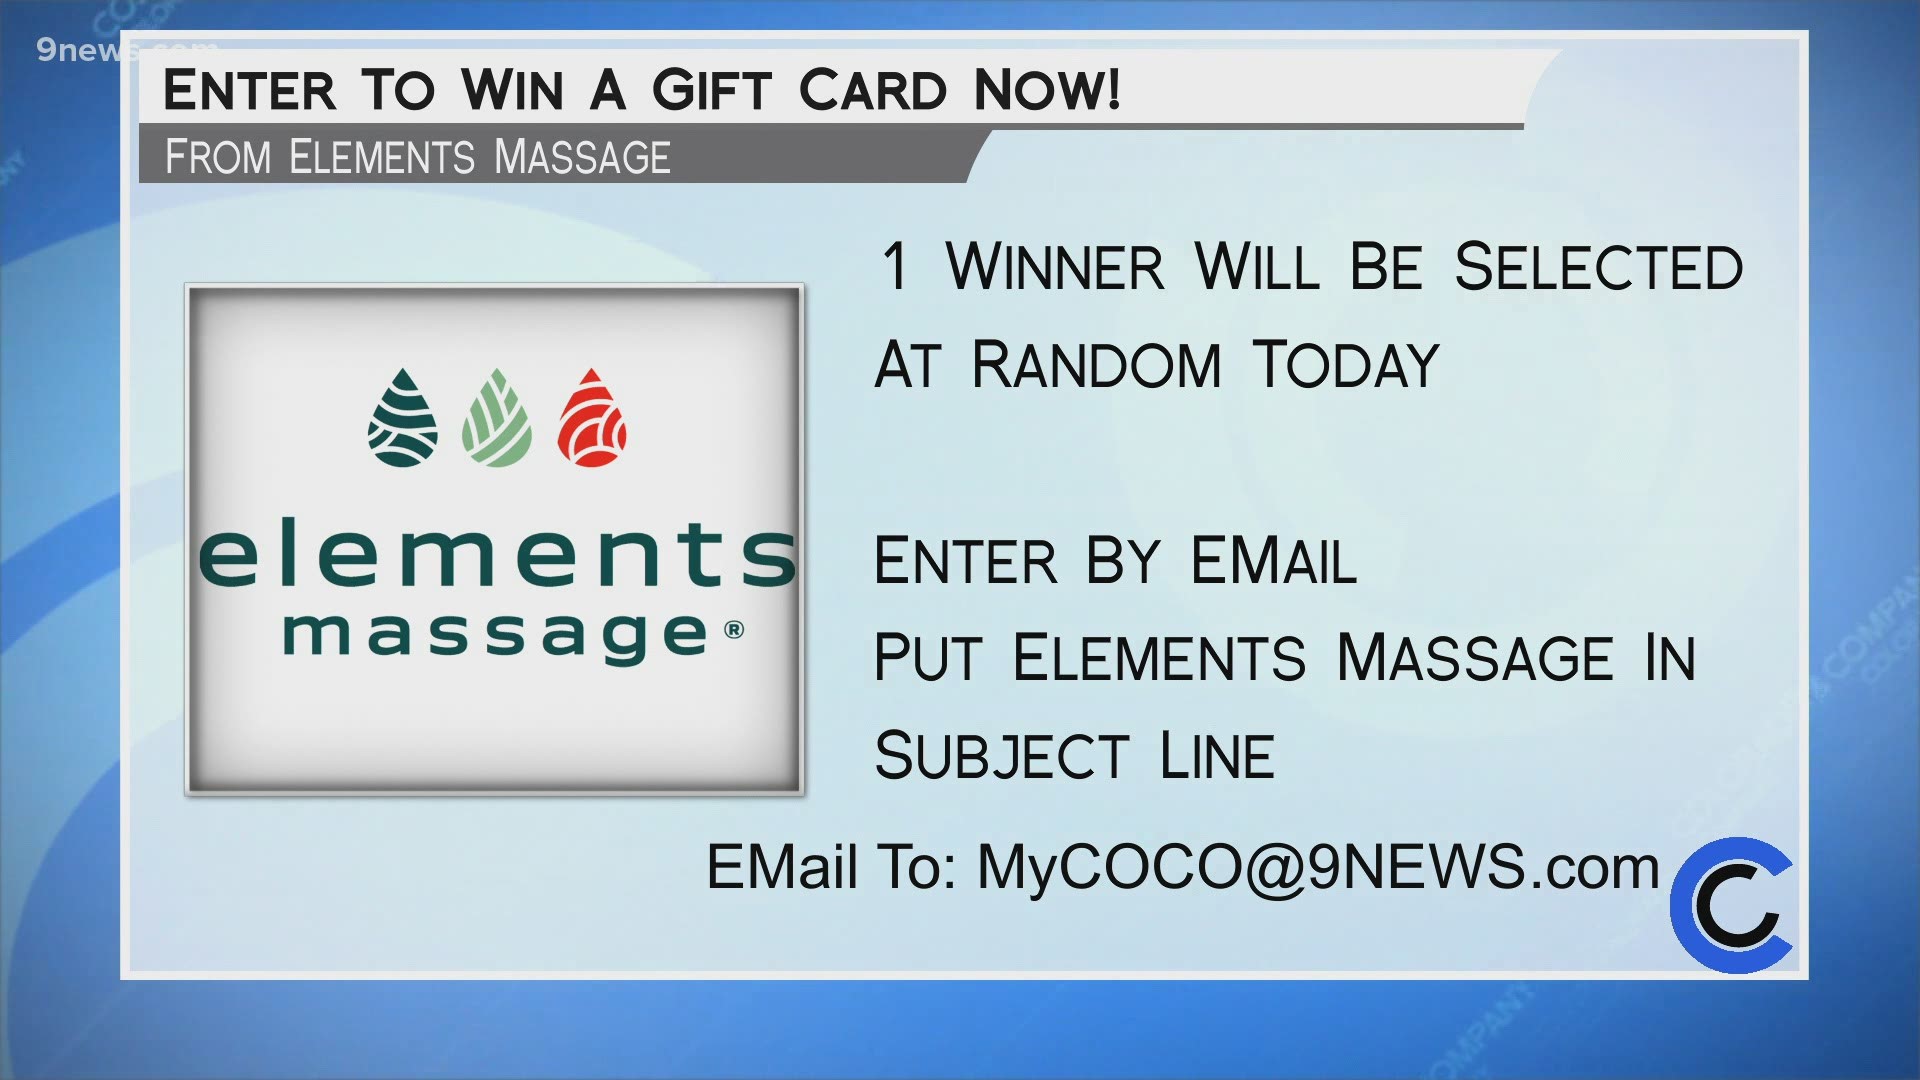 Elements Massage is open and following all health and safety protocols to keep you safe. Get started today at ElementsMassage.com. *GIVEAWAY CLOSED*